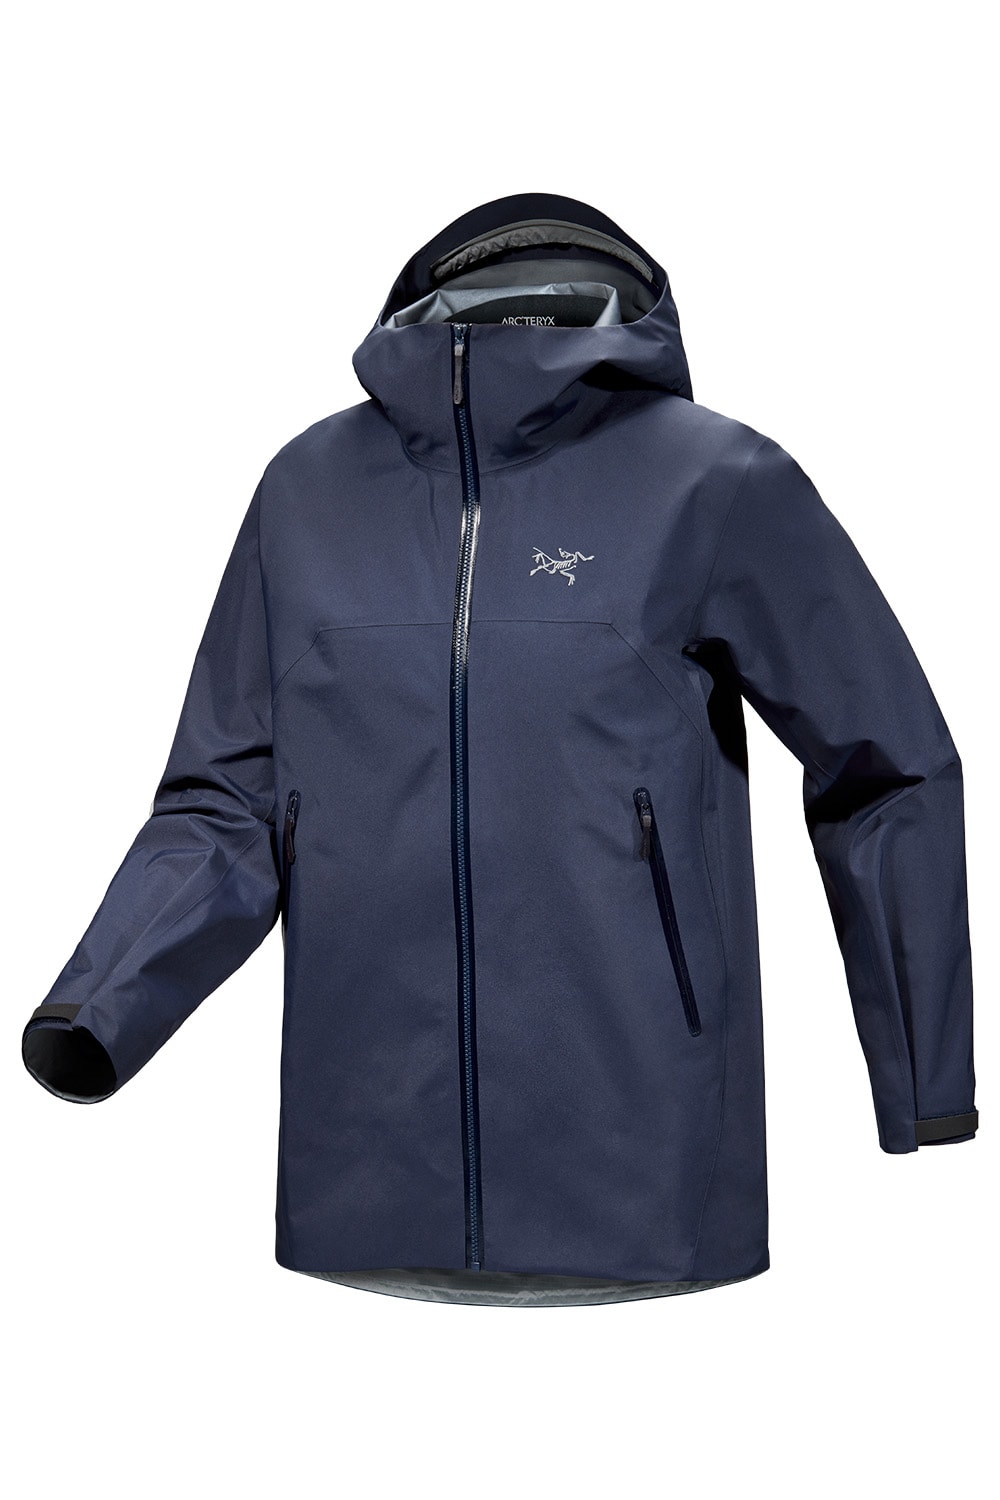 Arc'teryx Launches Sustainable ePA Beta Jacket Featuring a Brand New Version of GORE-TEX